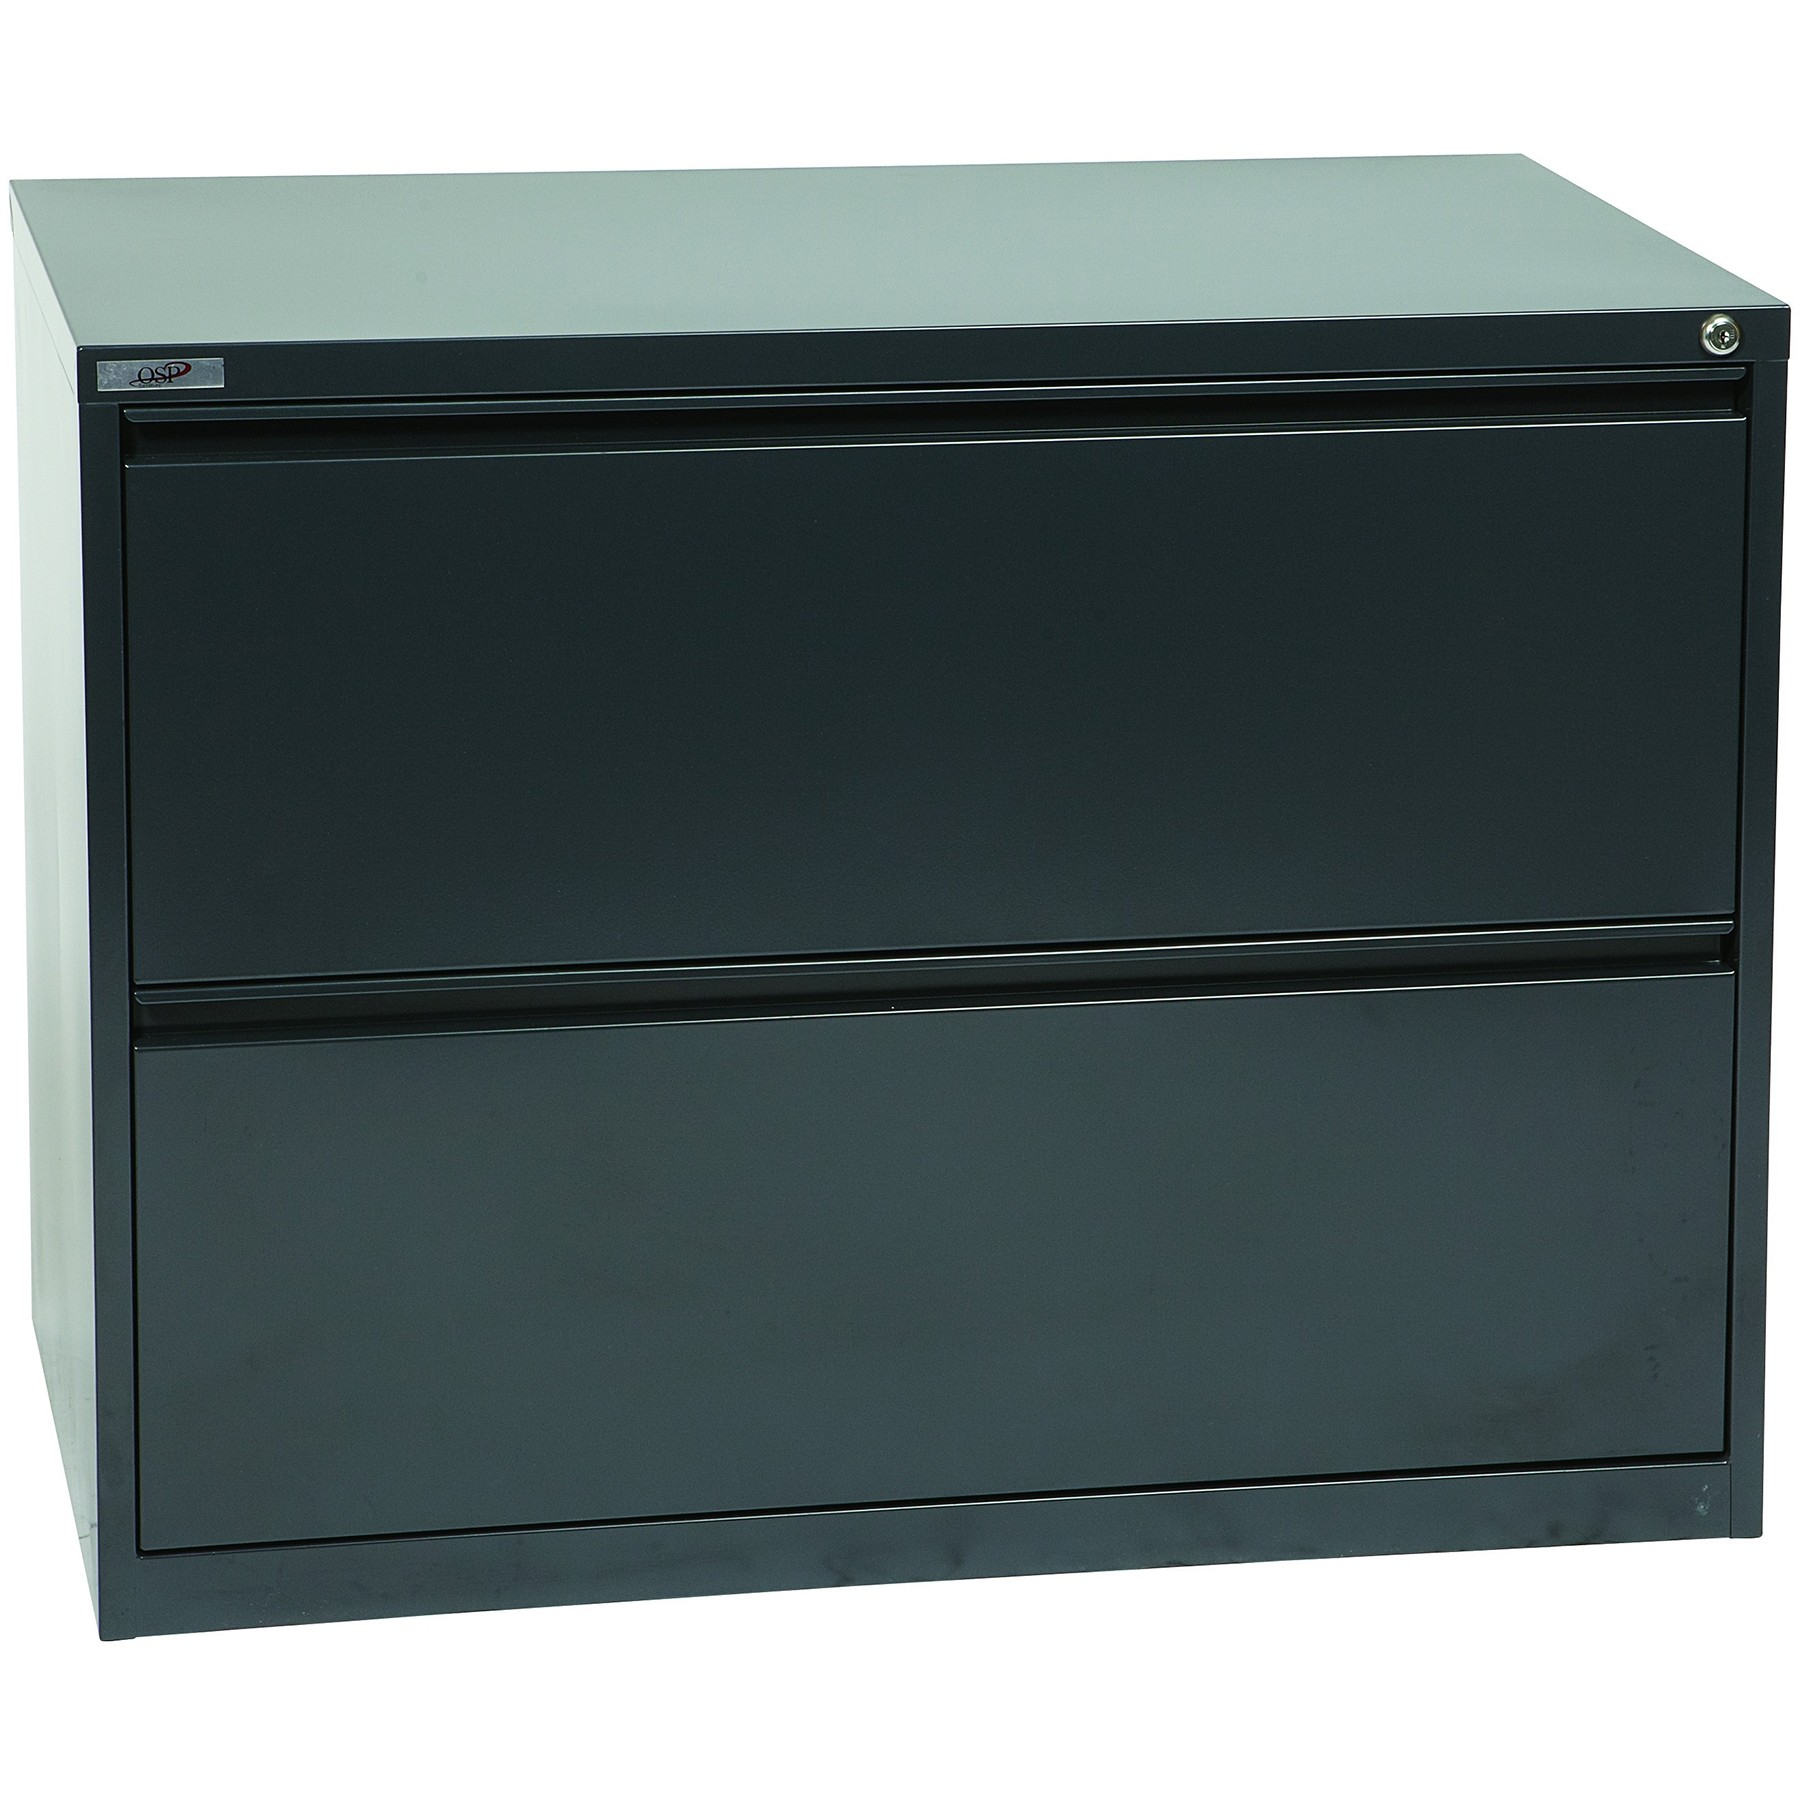 Osp Lateral File Cabinets At Office Designs inside size 1800 X 1800